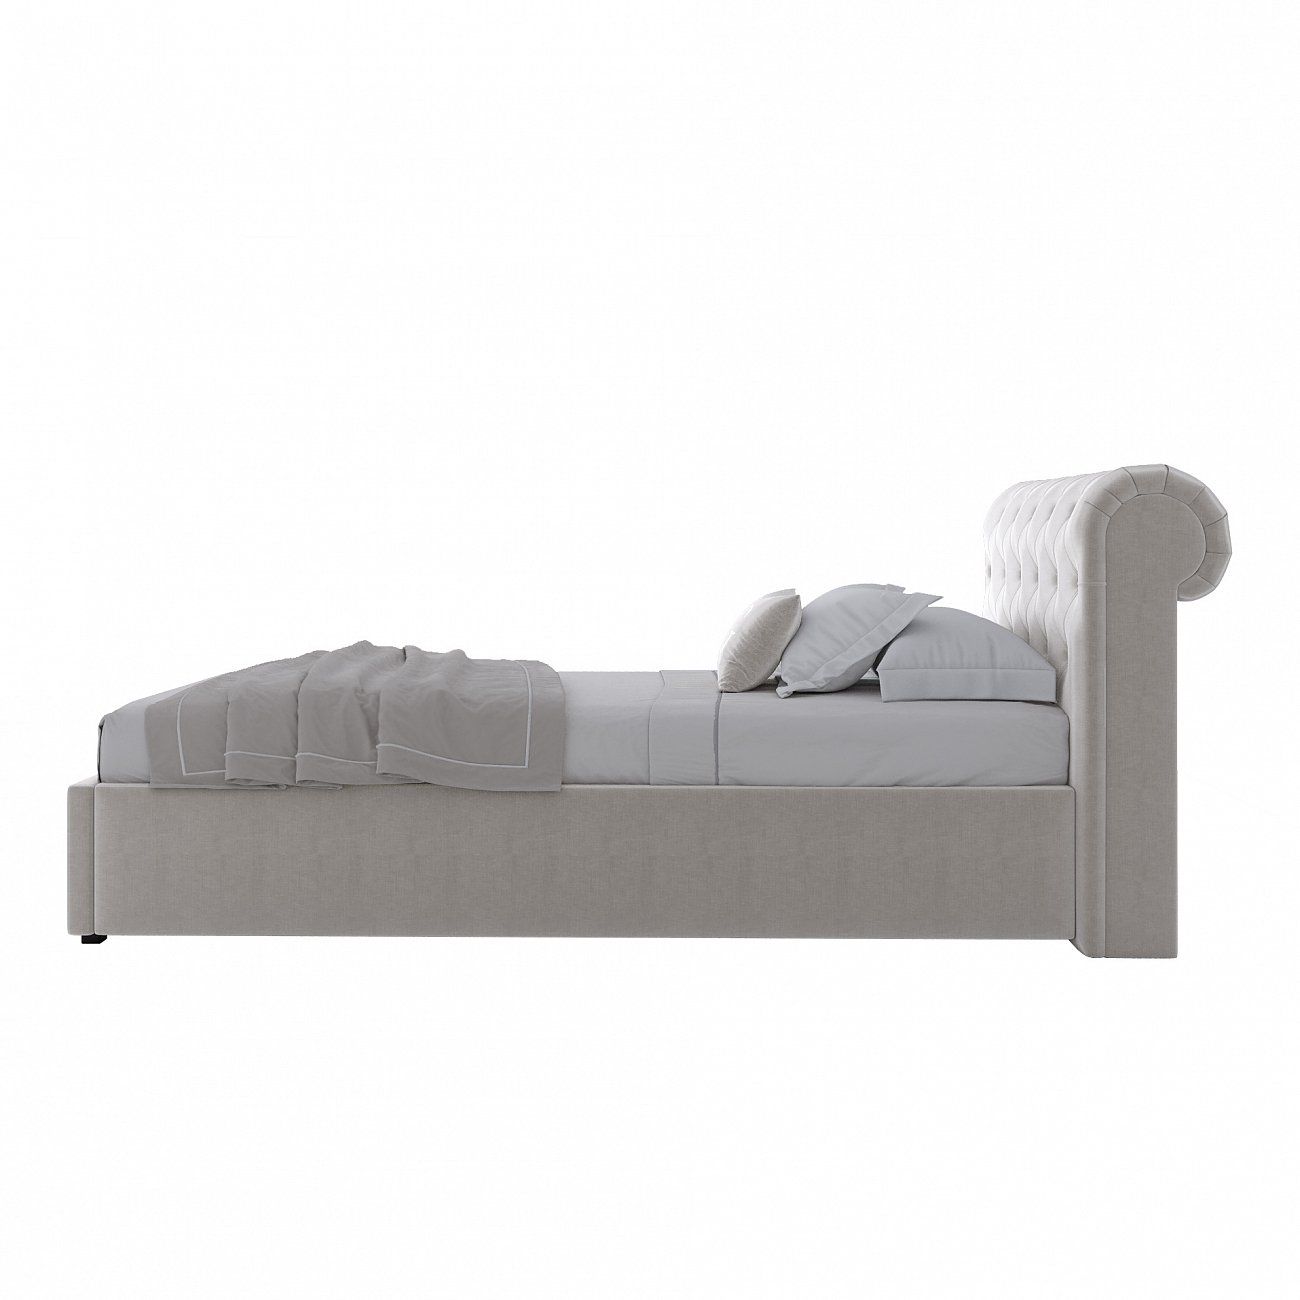 Single bed with upholstered headboard 90x200 cm milk Sweet Dreams